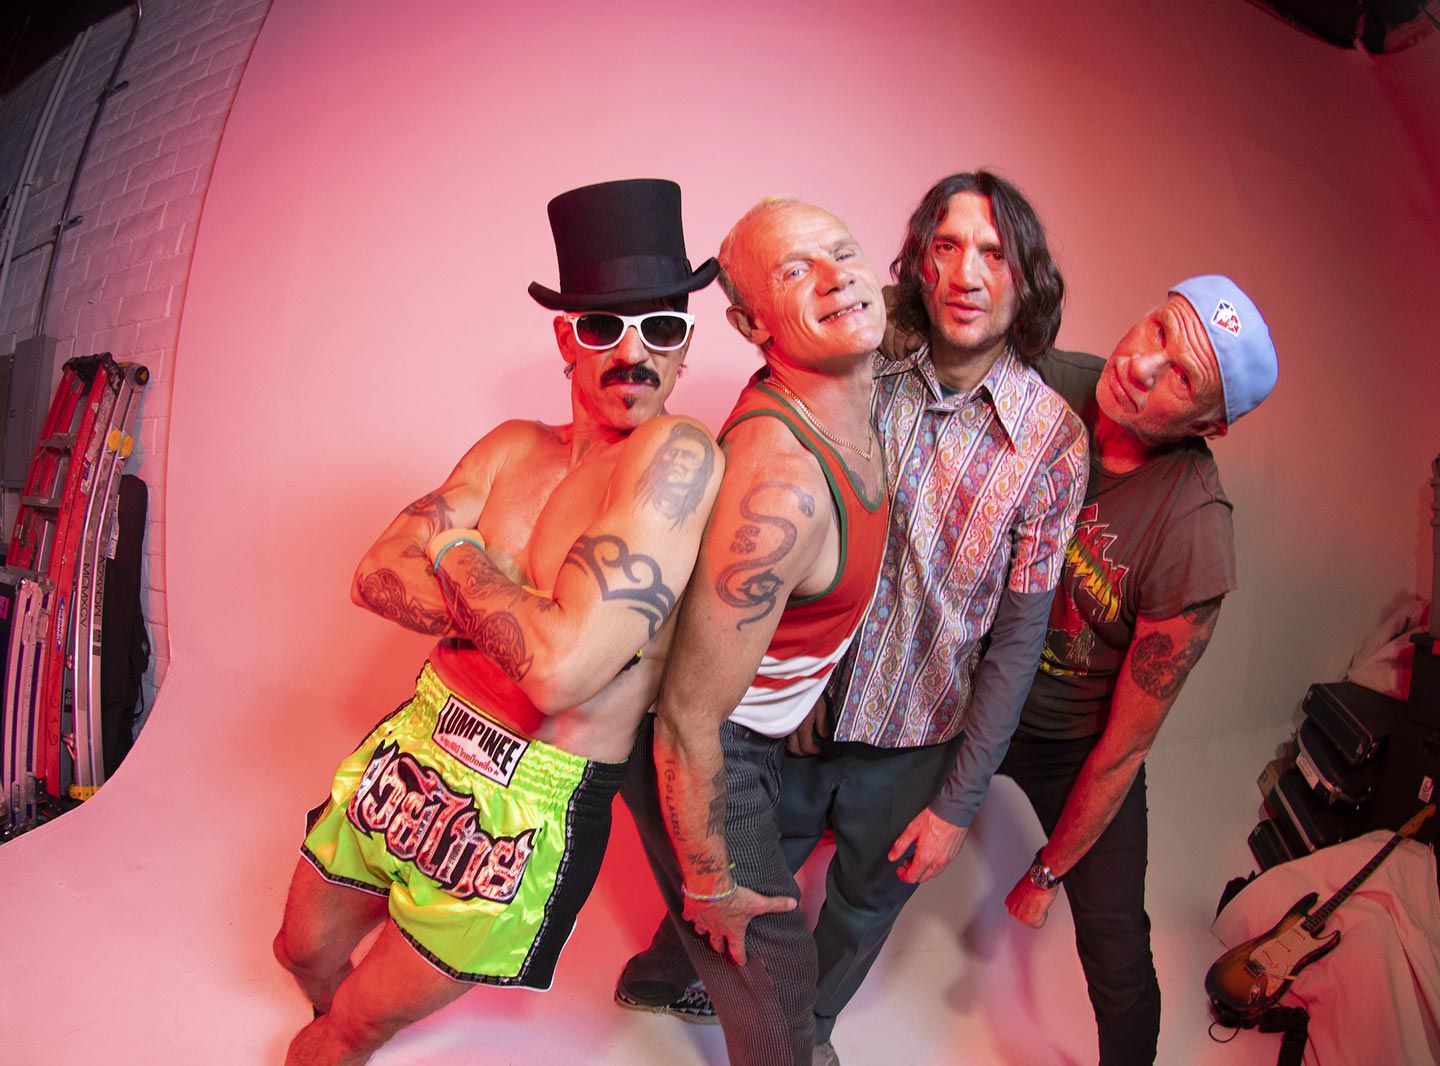 Headlining acts this year include the Red Hot Chili Peppers, Jelly Roll, and more.